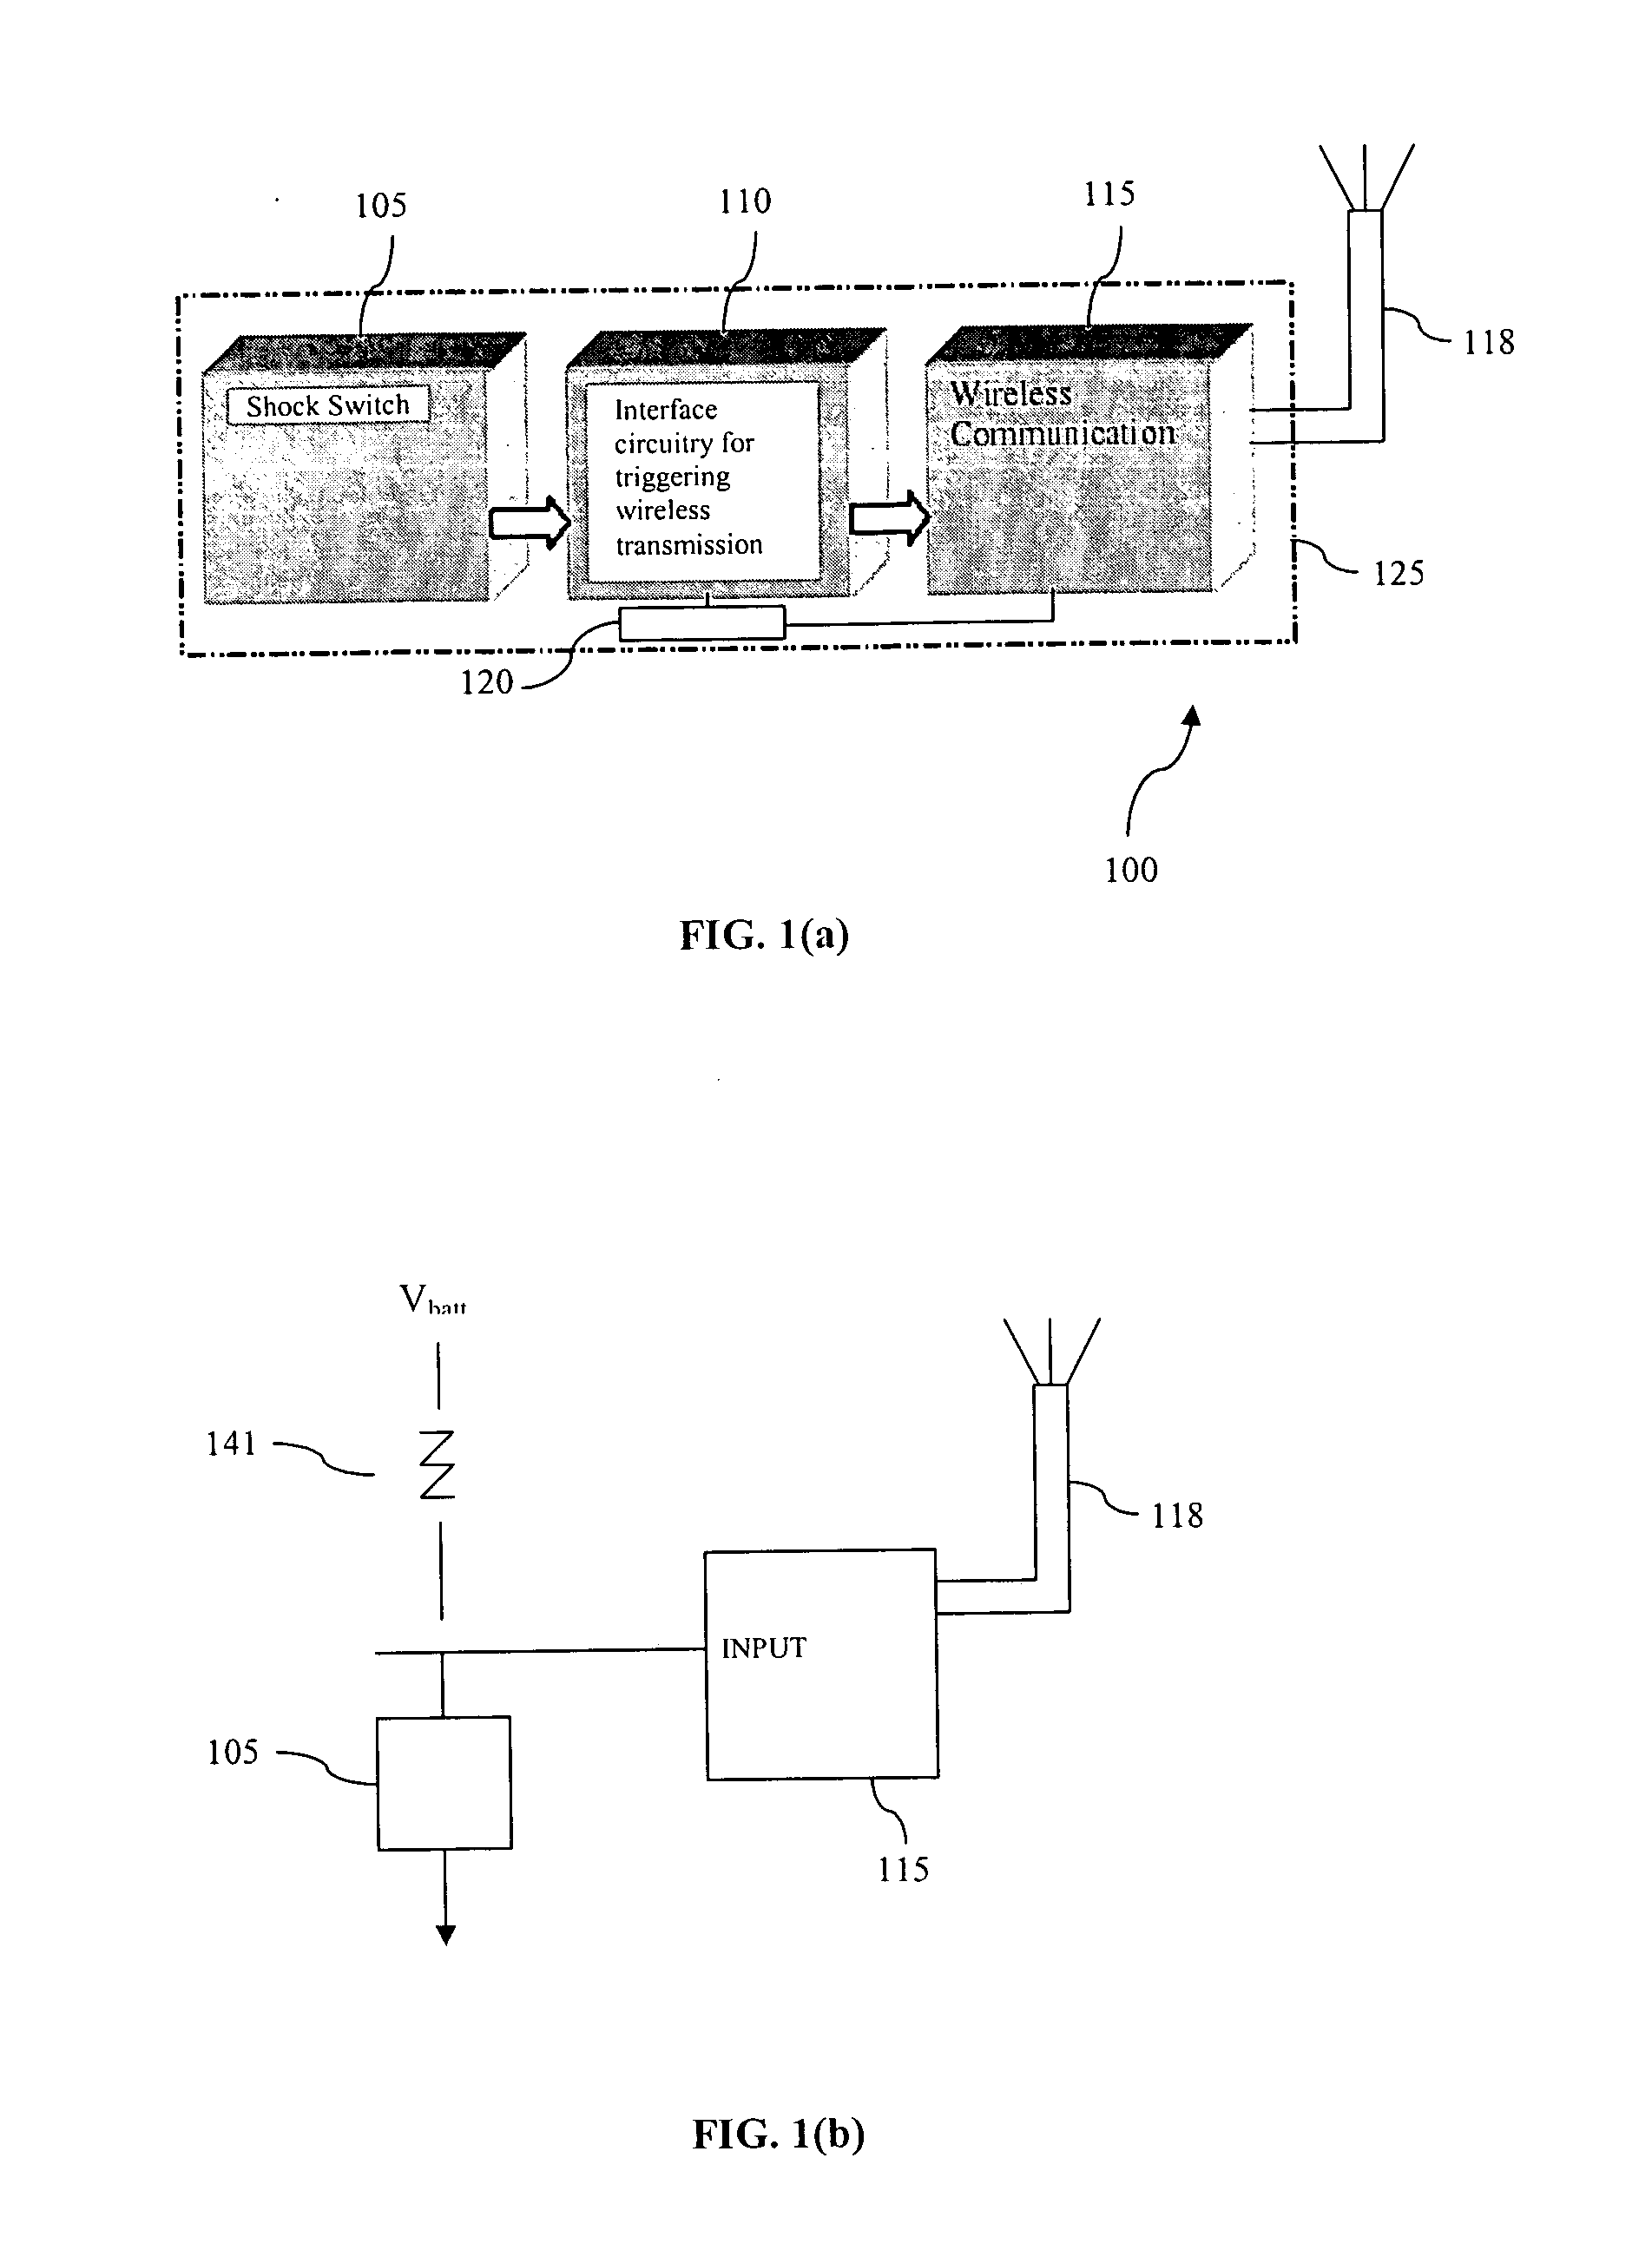 Remote shock sensing and notification system